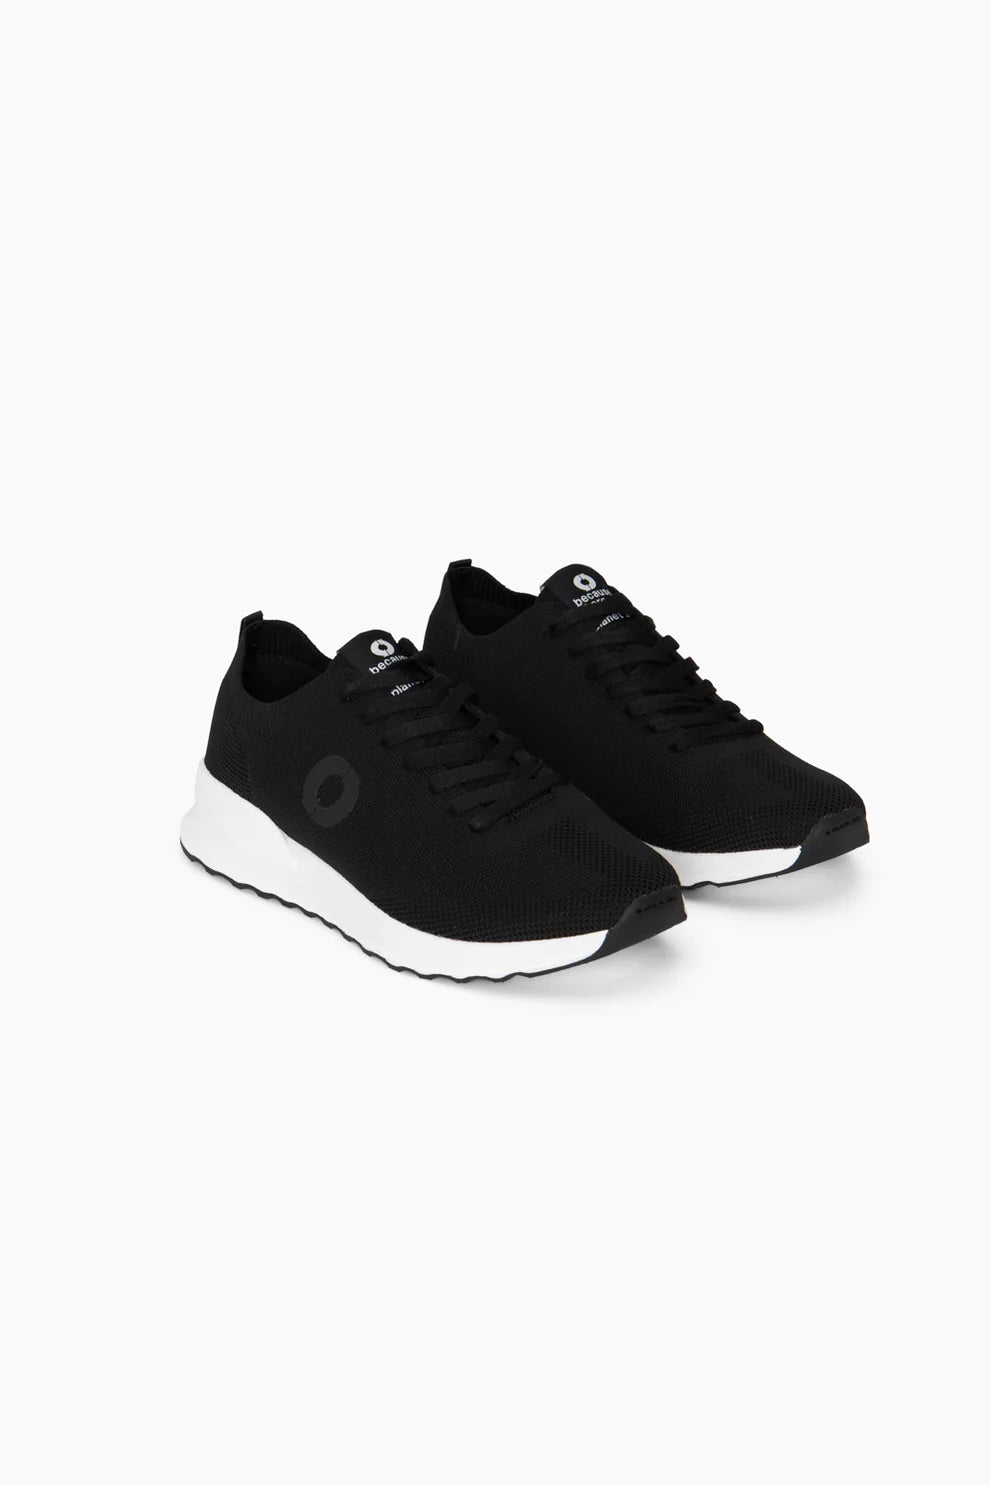 Ecoalf W's Princealf Knit Sneakers - Recycled polyester Black Shoes